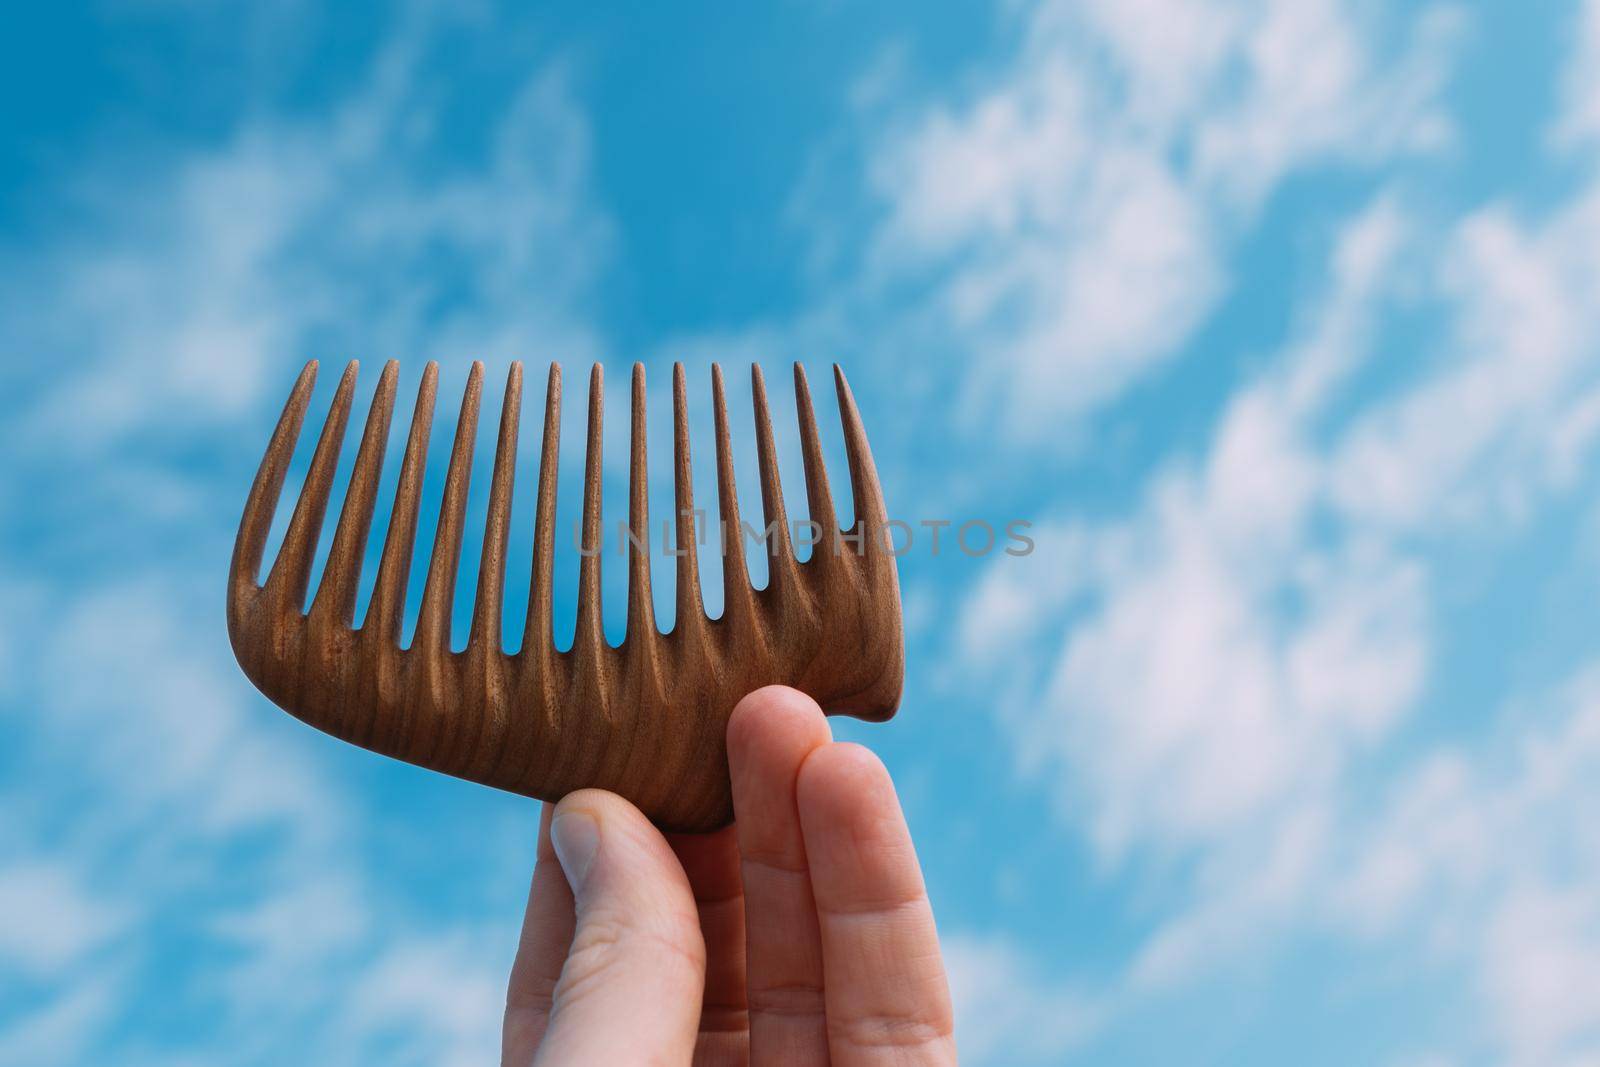 A hand holding natural wooden comb for scalp massage and aroma combing at blue sky background. Hair care concept